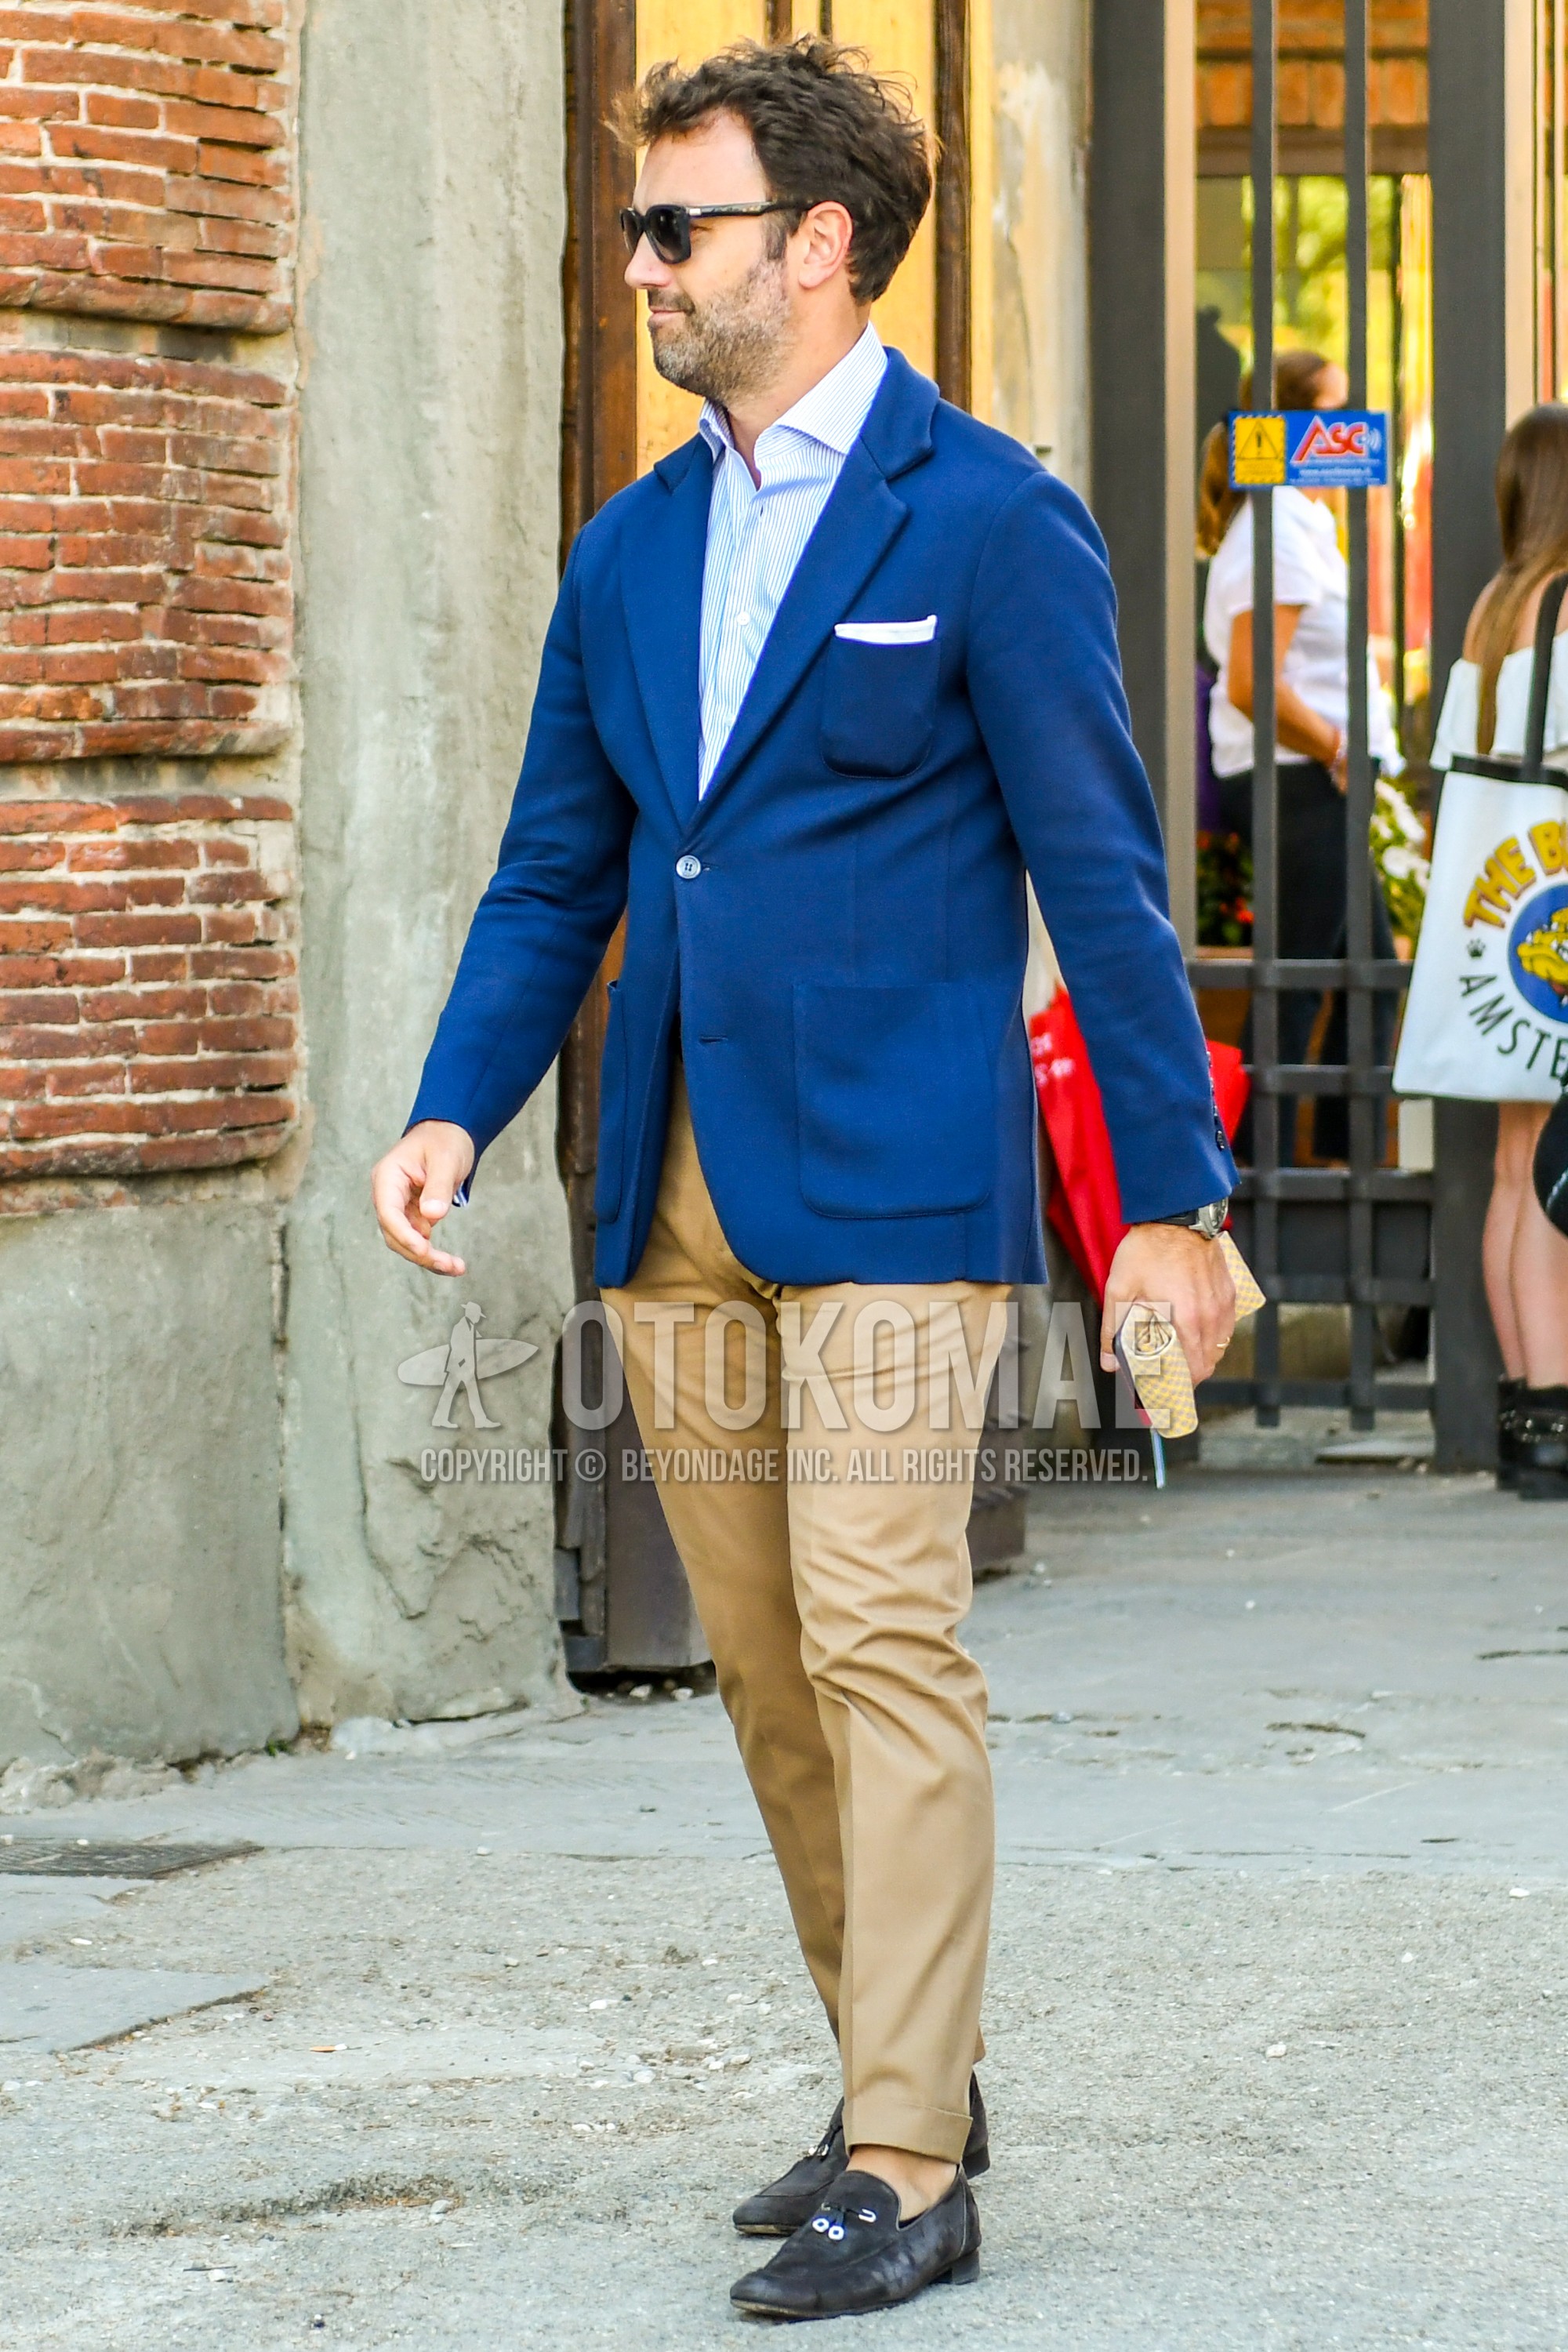 Men's spring summer autumn outfit with plain sunglasses, navy plain tailored jacket, white light blue stripes shirt, beige plain chinos, gray  loafers leather shoes, suede shoes leather shoes.